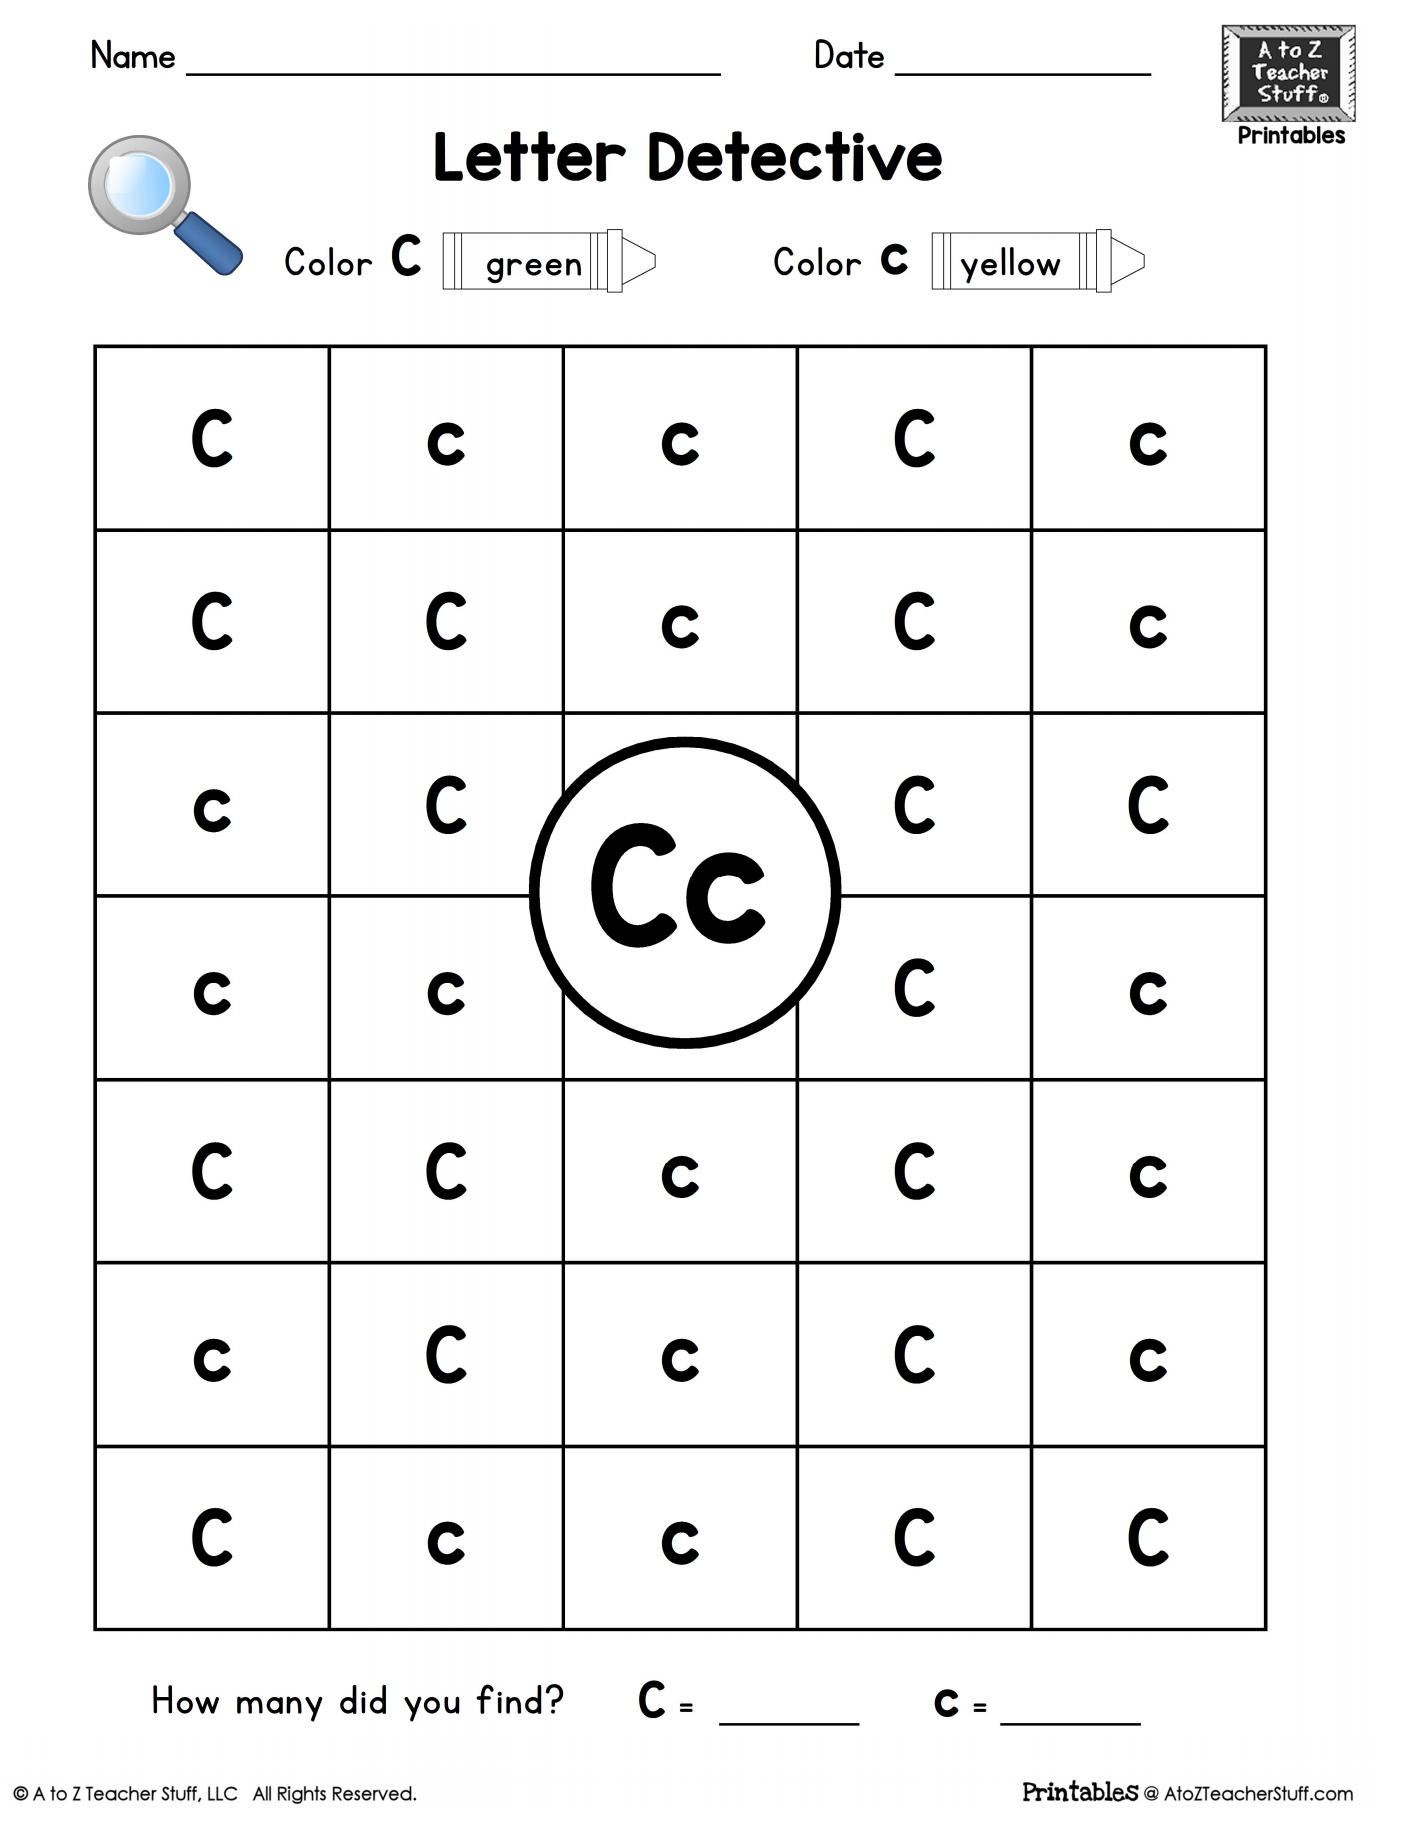 Letter C: Letter Detective Uppercase &amp;amp; Lowercase Visual throughout Letter C Worksheets For First Grade